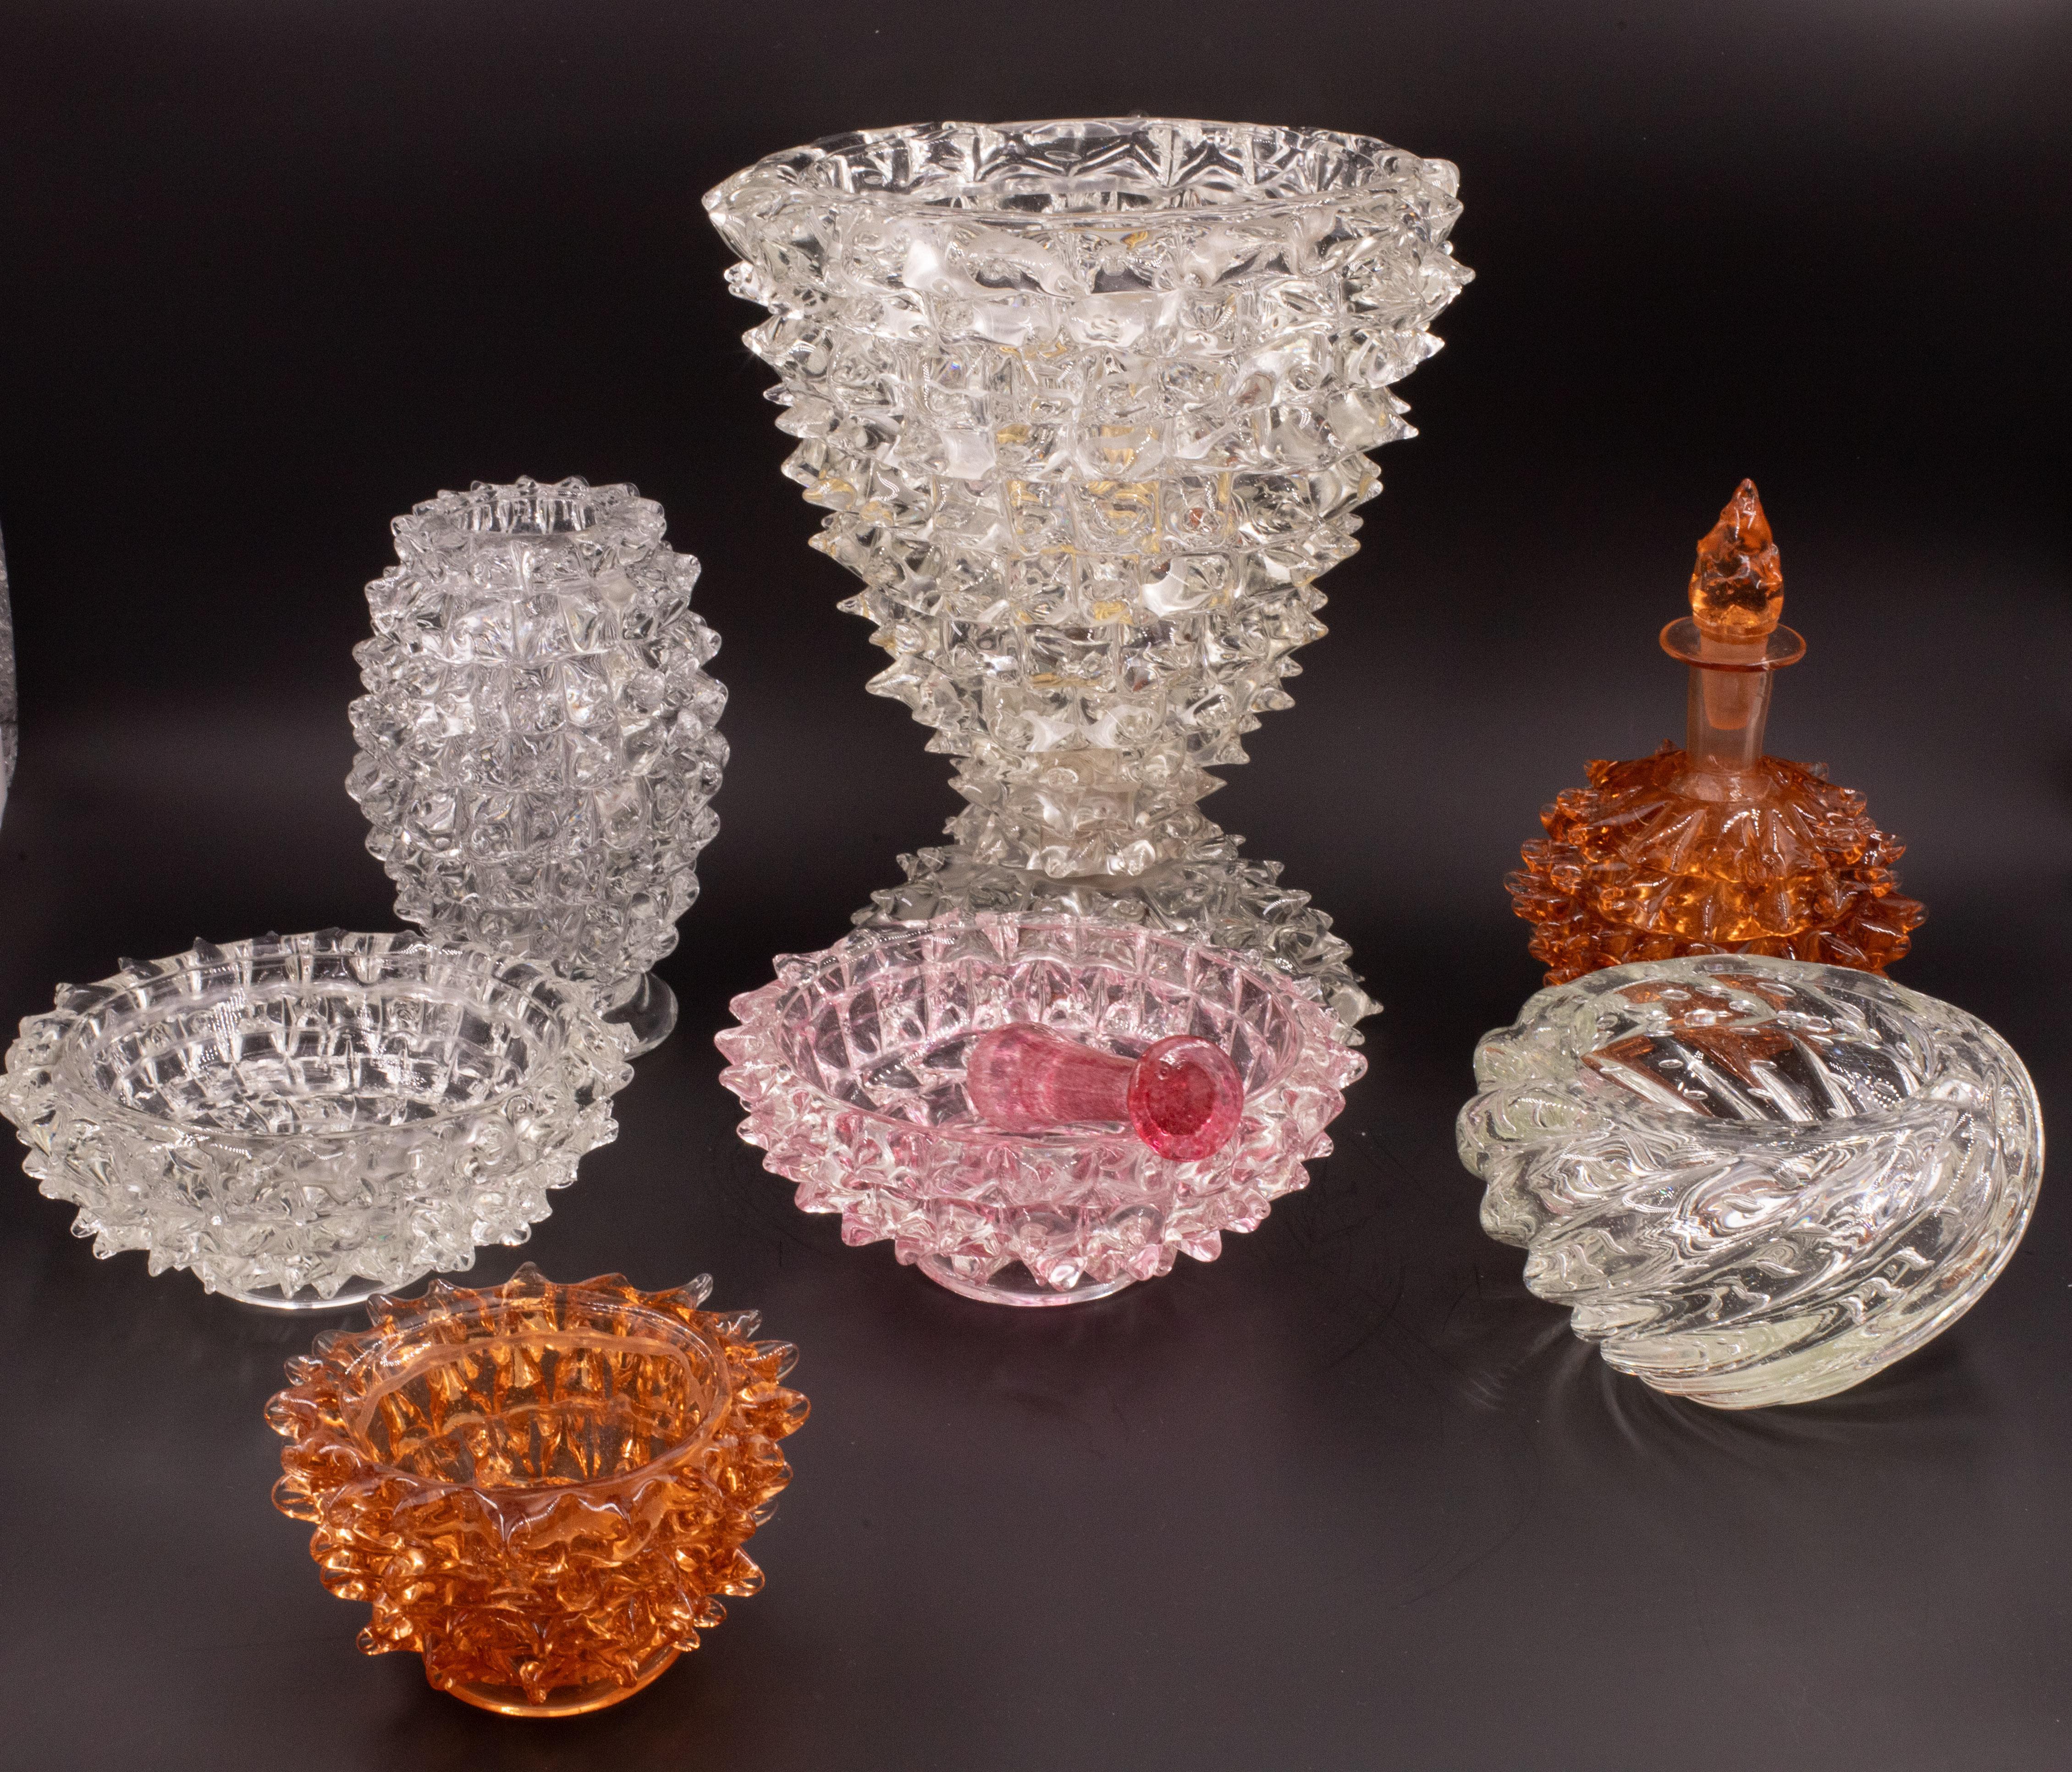 Rare Set of 3 Amber Rostrato Murano Glass Vases by Barovier & Toso, 1940s For Sale 8